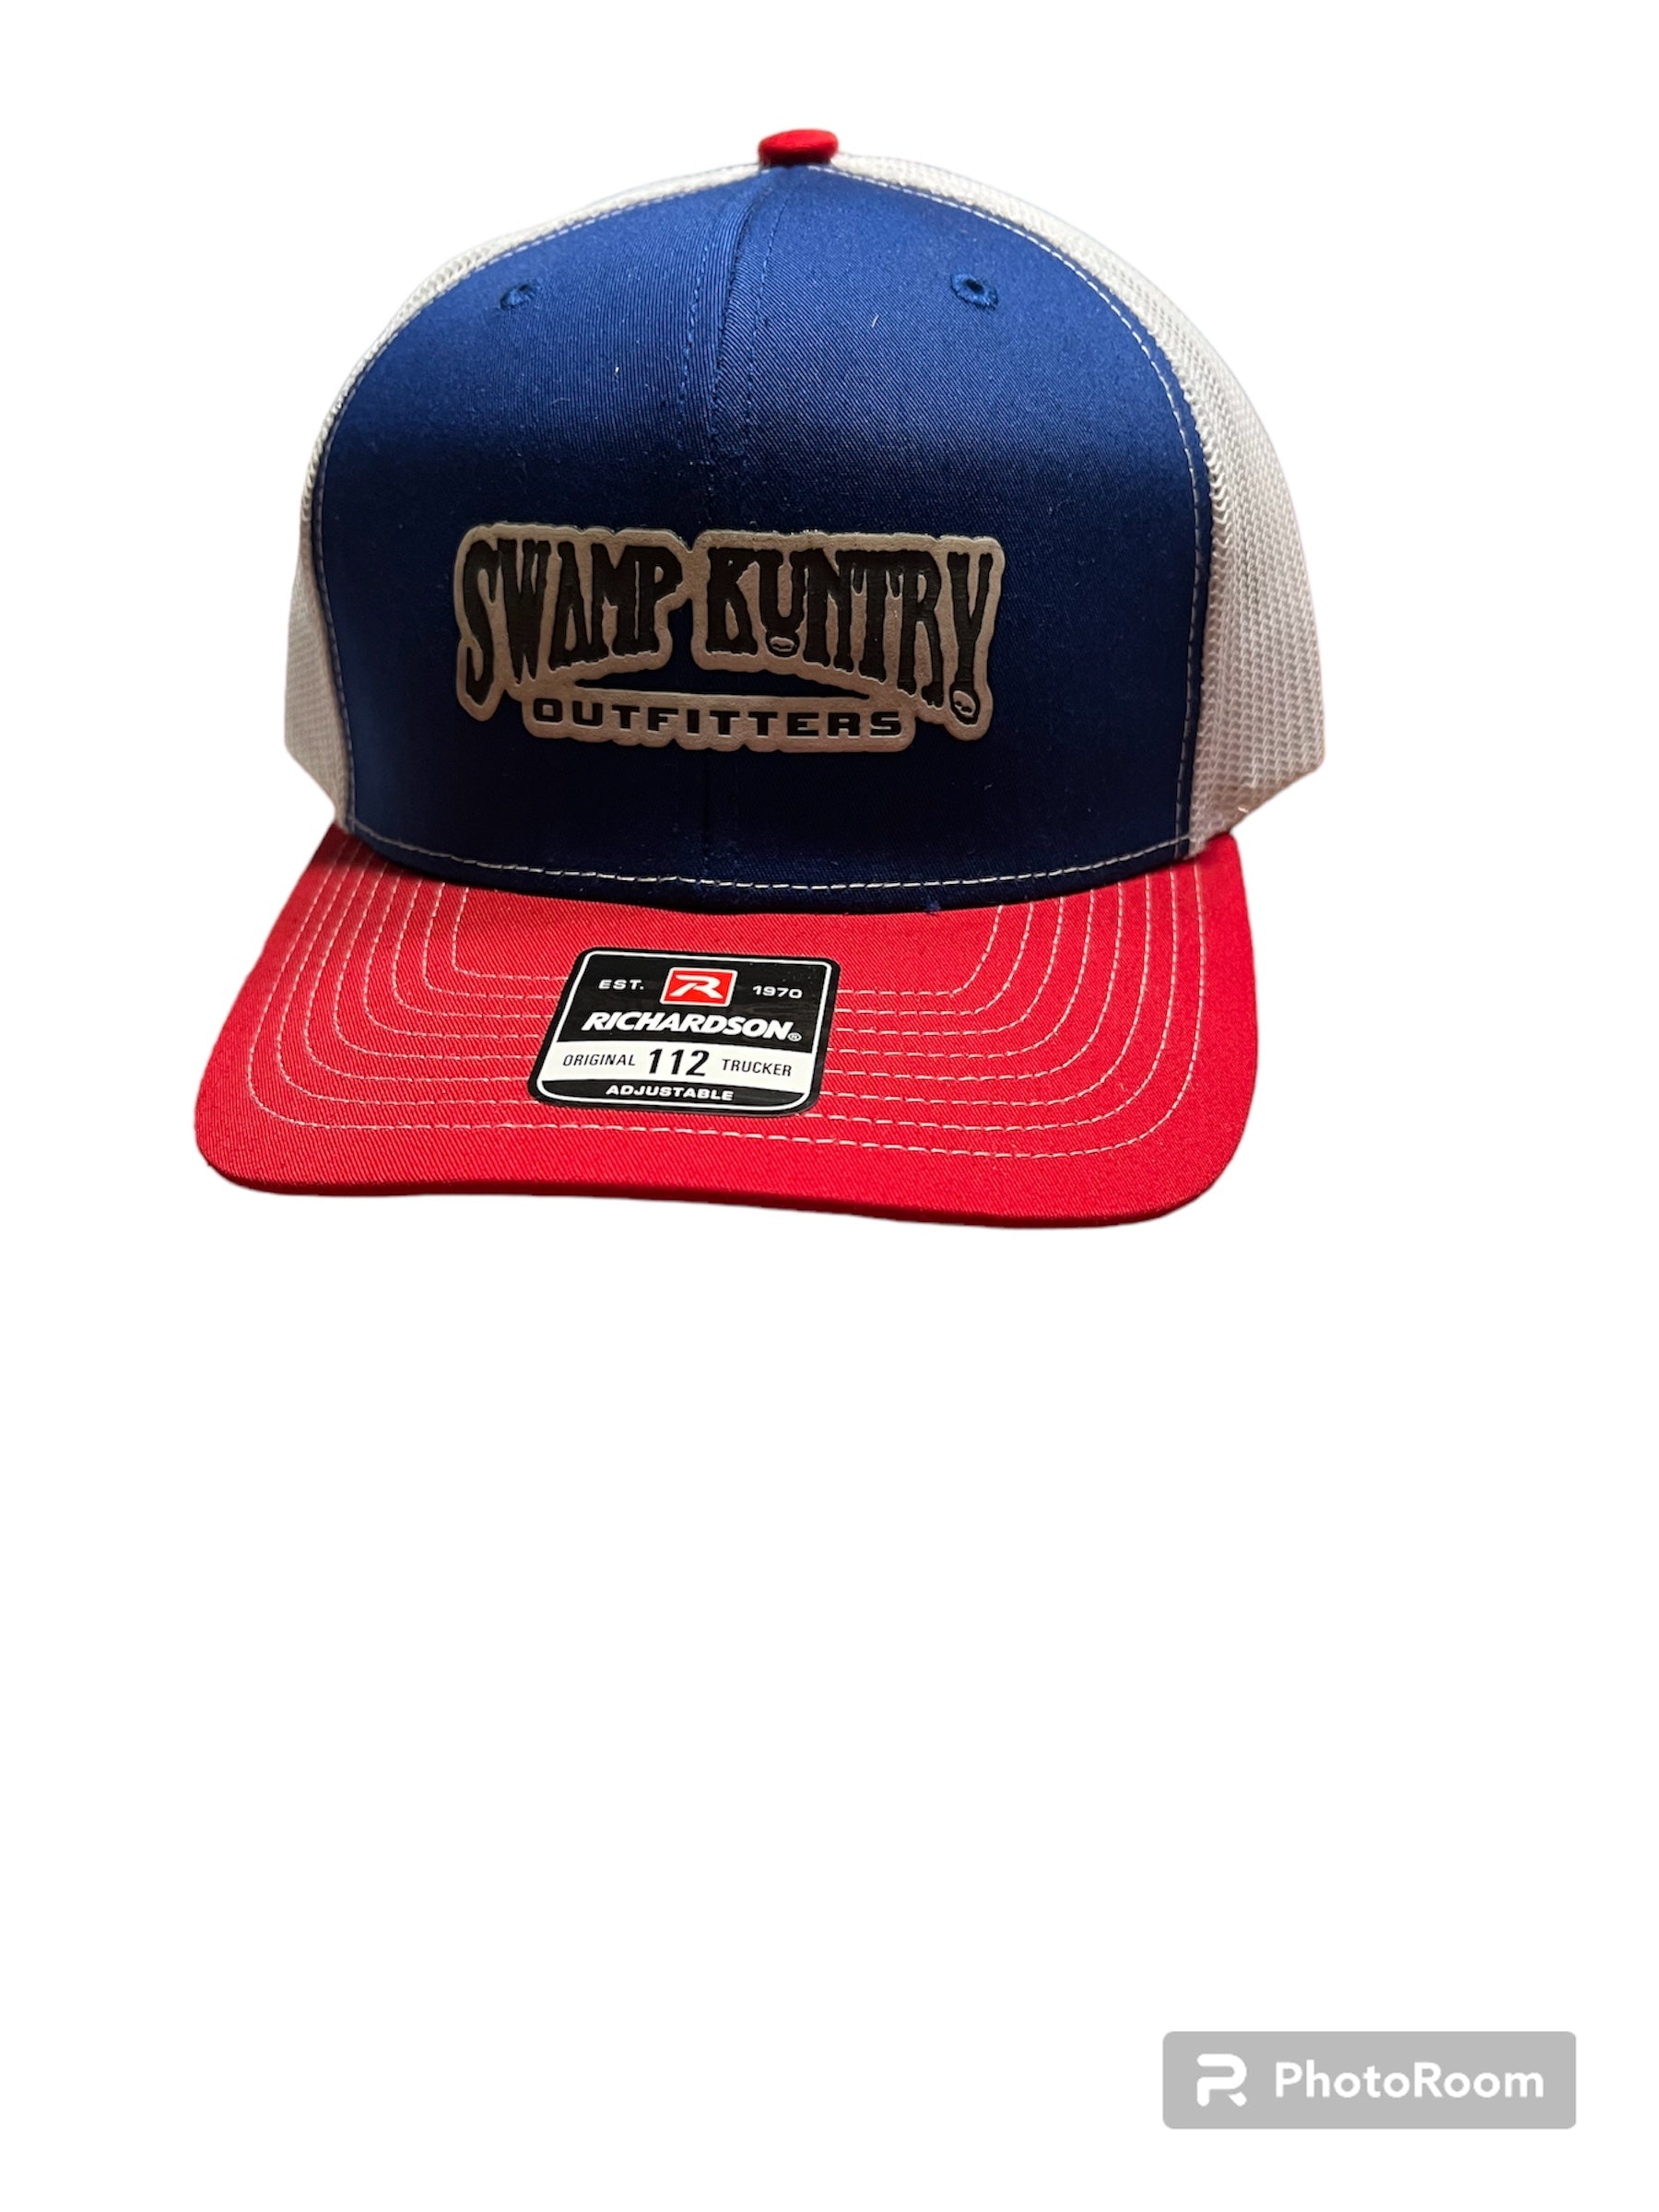 Swamp Kuntry Outfitters Logo Hat